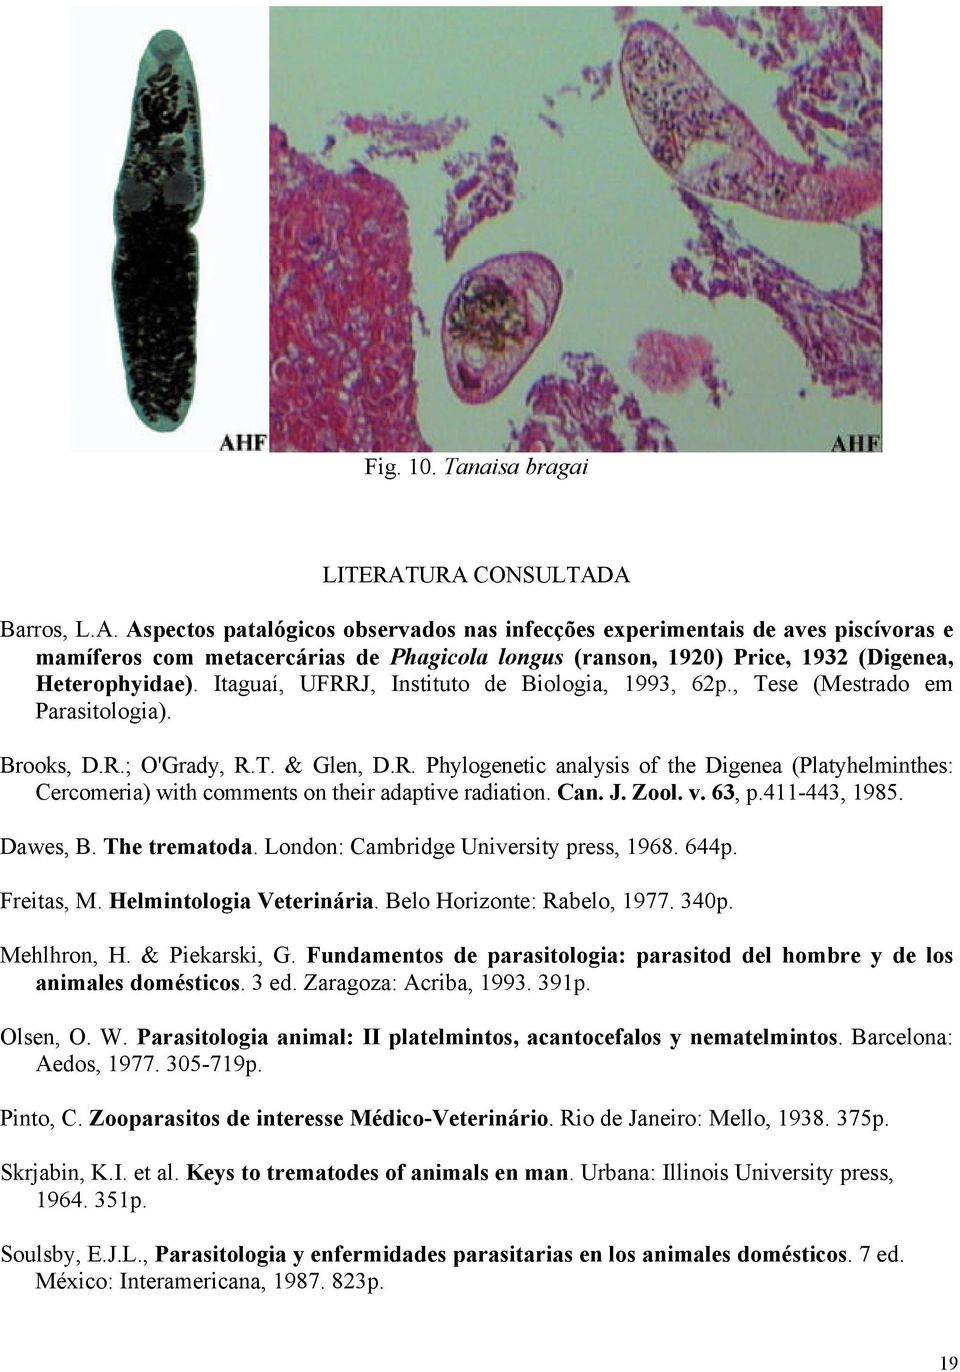 Itaguaí, UFRRJ, Instituto de Biologia, 1993, 62p., Tese (Mestrado em Parasitologia). Brooks, D.R.; O'Grady, R.T. & Glen, D.R. Phylogenetic analysis of the Digenea (Platyhelminthes: Cercomeria) with comments on their adaptive radiation.